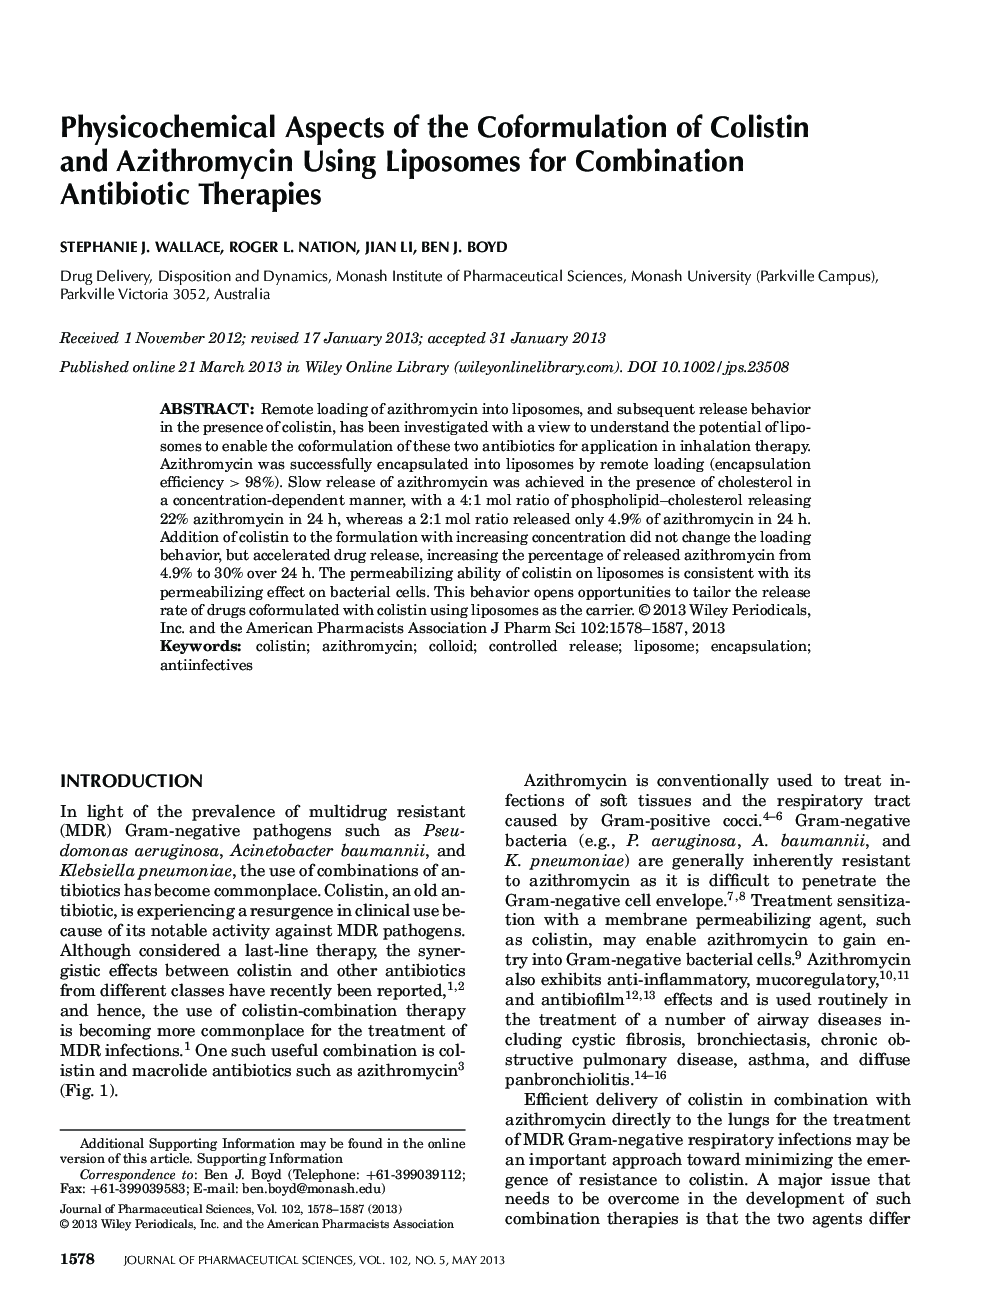 Physicochemical Aspects of the Coformulation of Colistin and Azithromycin Using Liposomes for Combination Antibiotic Therapies